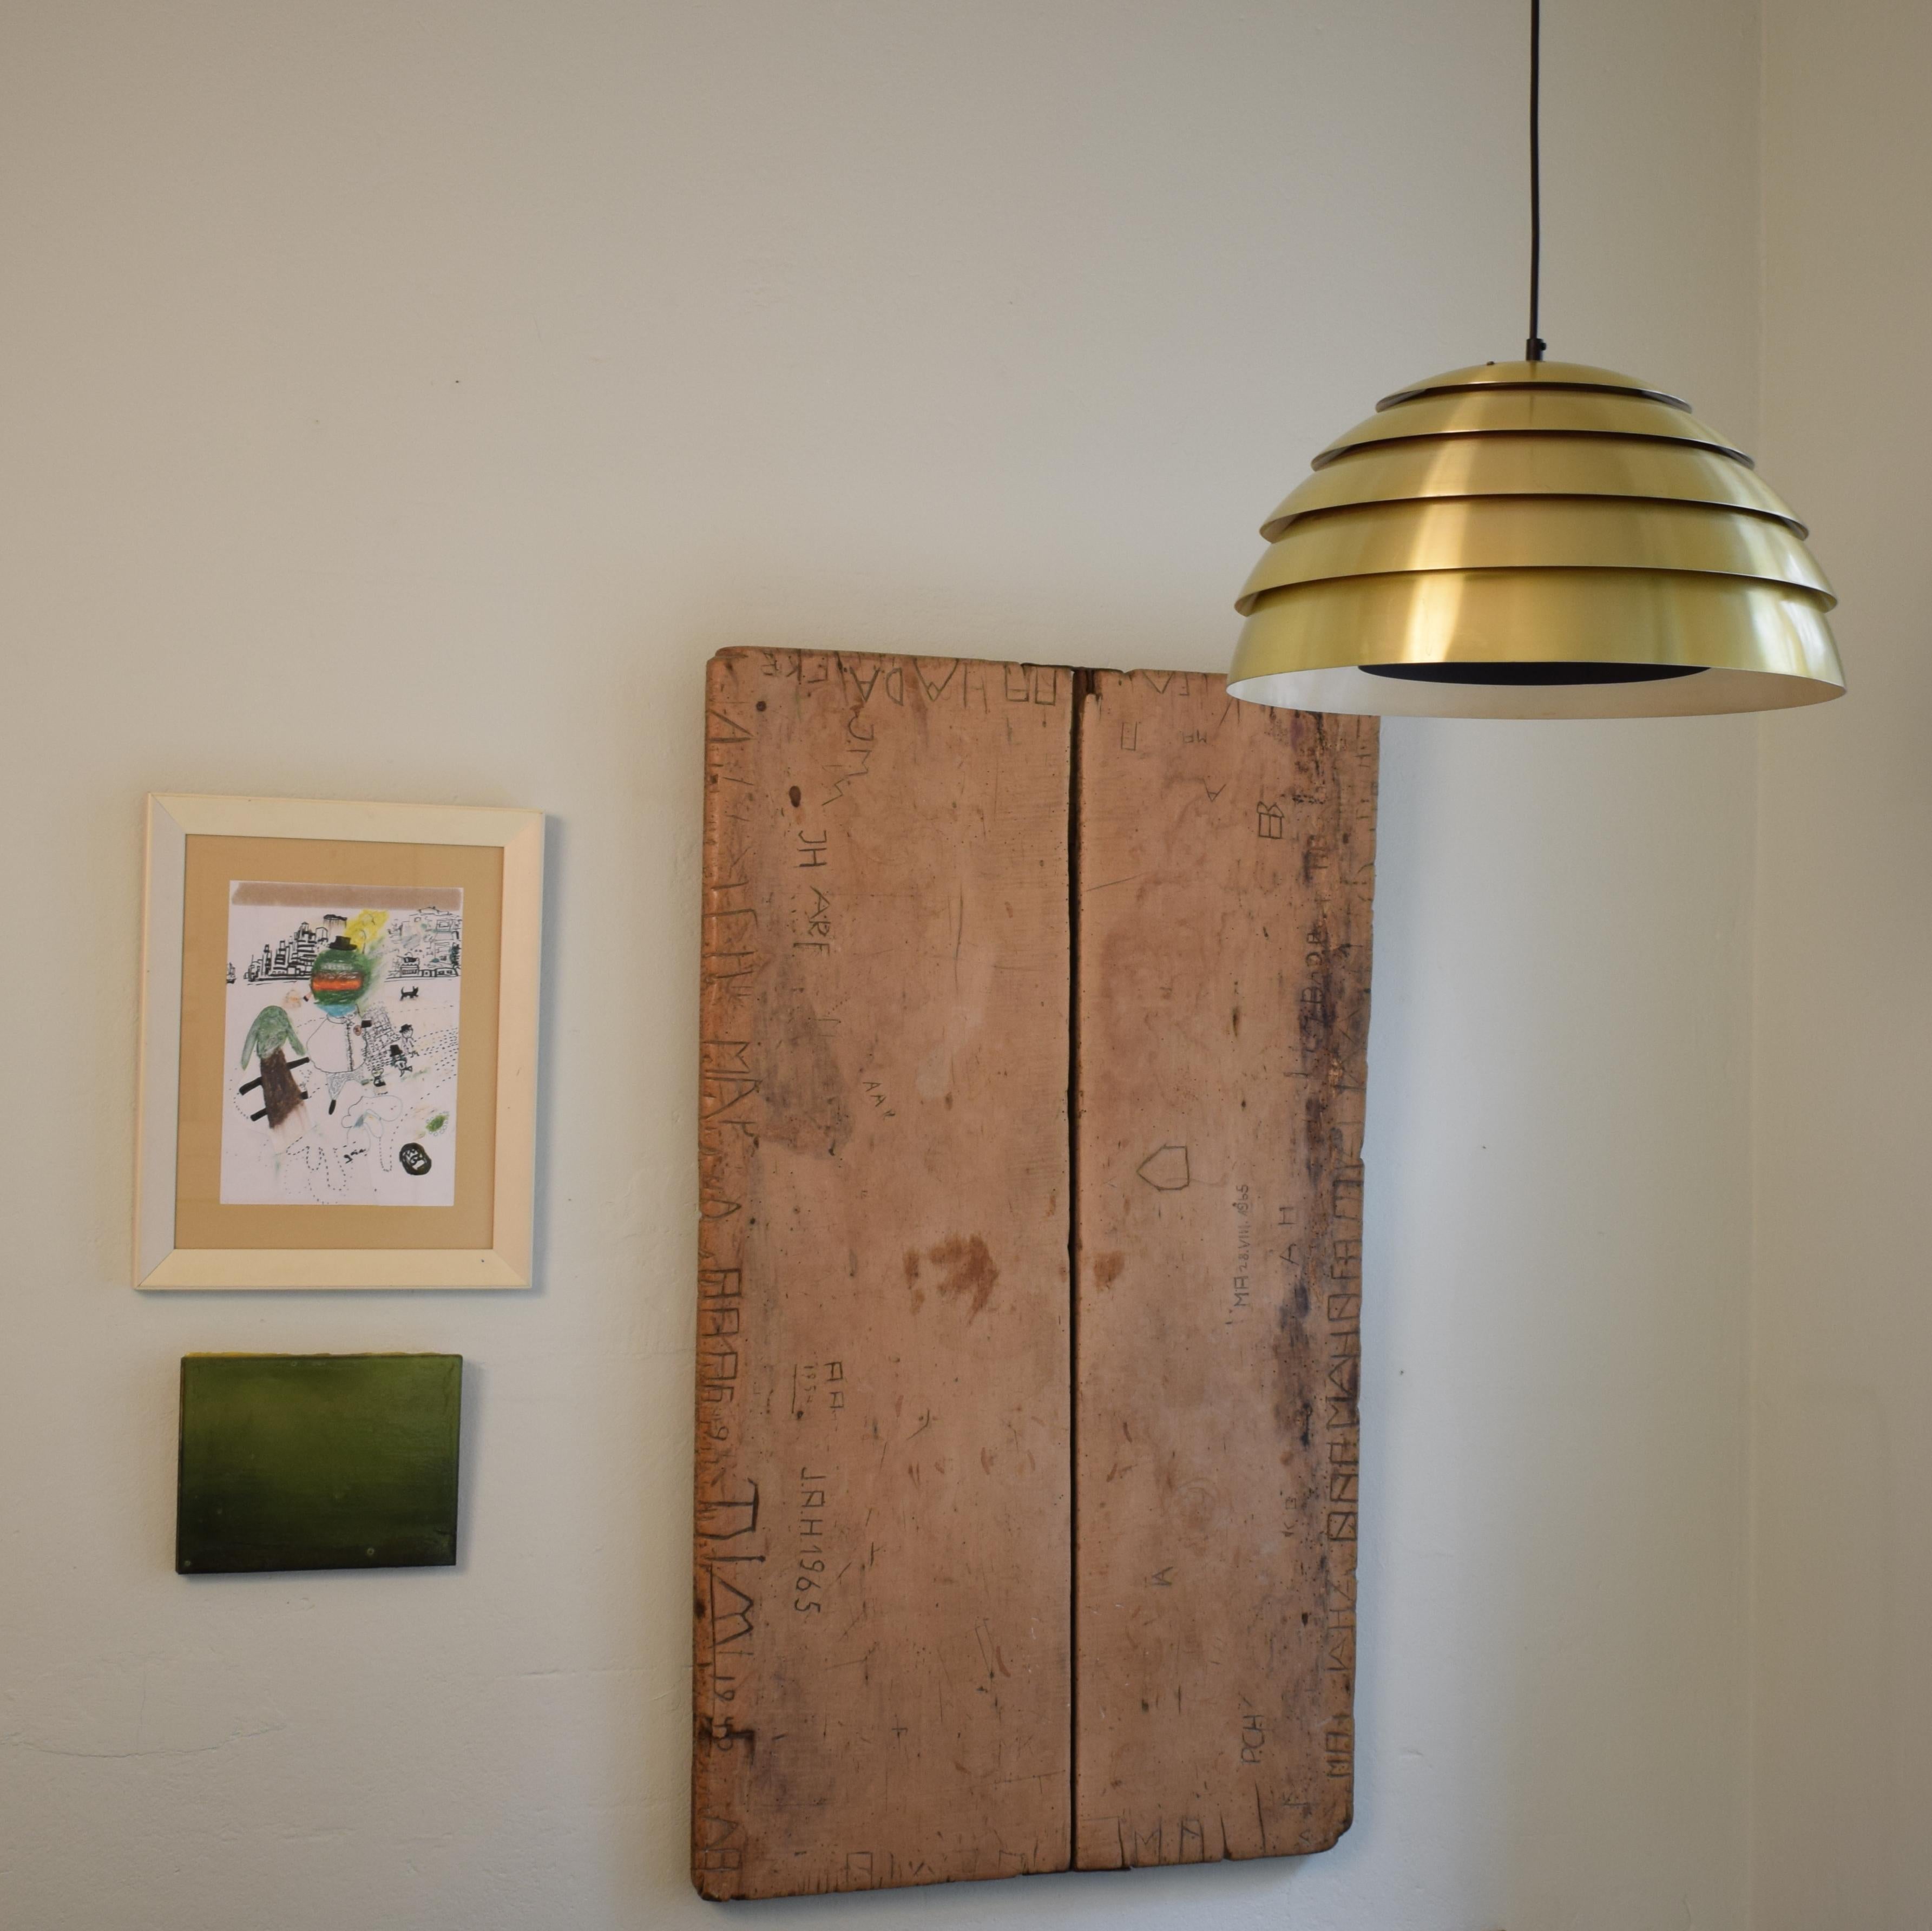 This beautiful midcentury Scandinavian / Swedish brass pendant was designed by Hans-Agne Jakobsson for Markaryd in the 1960s.
The lamp has got a cable which you can adjust in height. At the moment it is 140cm long.
A unique piece which is a great